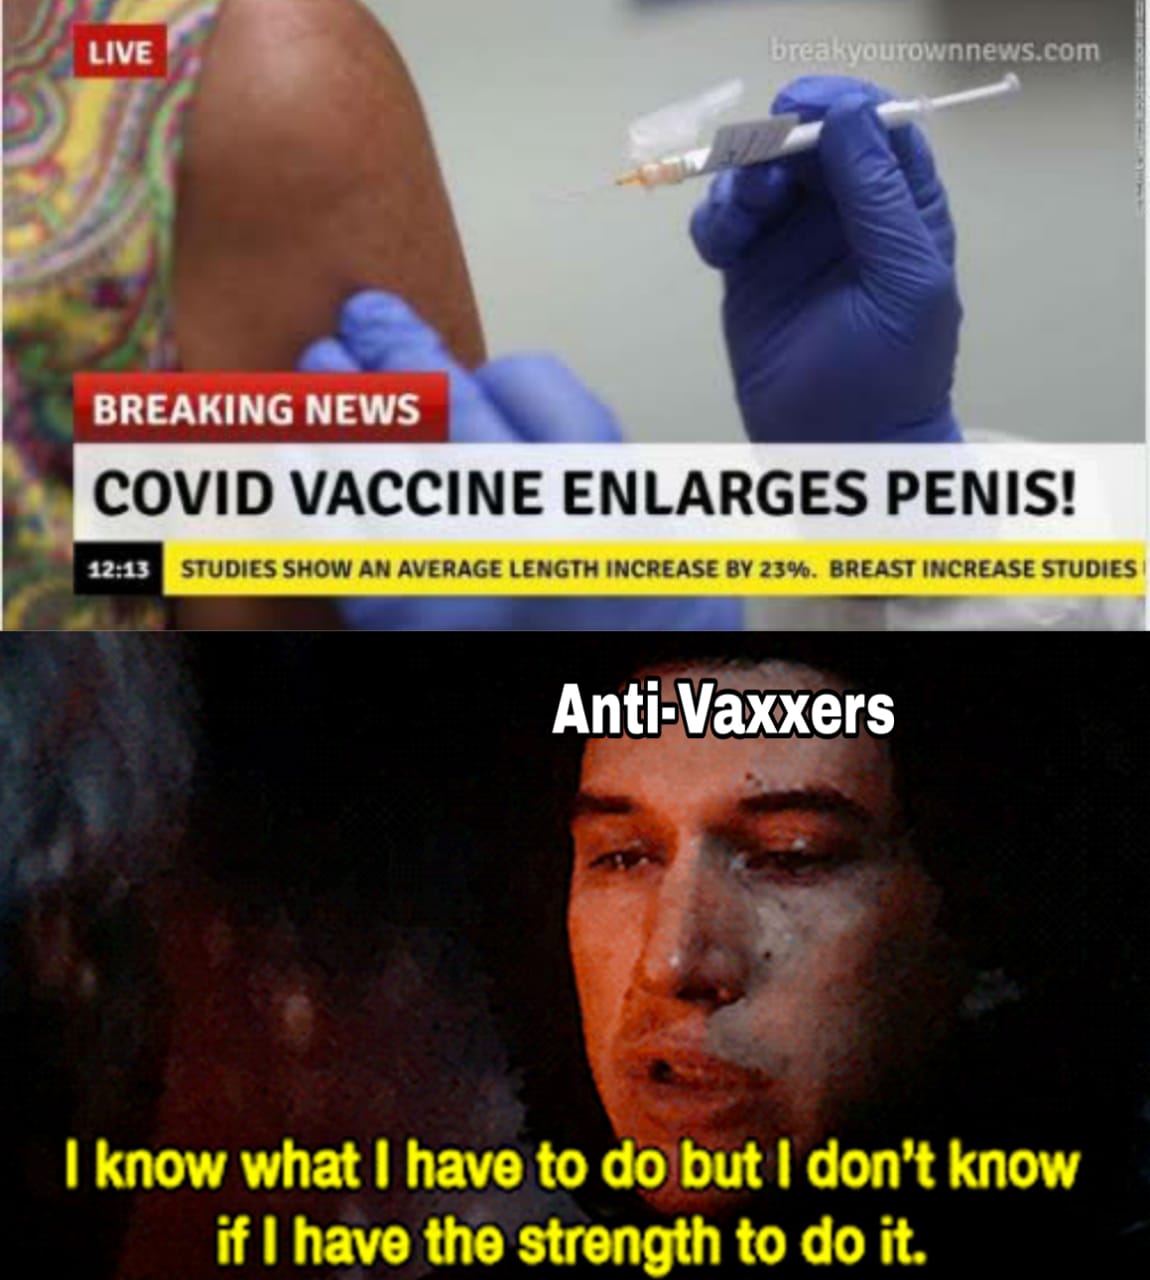 Are you suffering from Schlong Shrinkage due to COVID? The Covid vaccine could help enlarge your penis and restore your confidence.